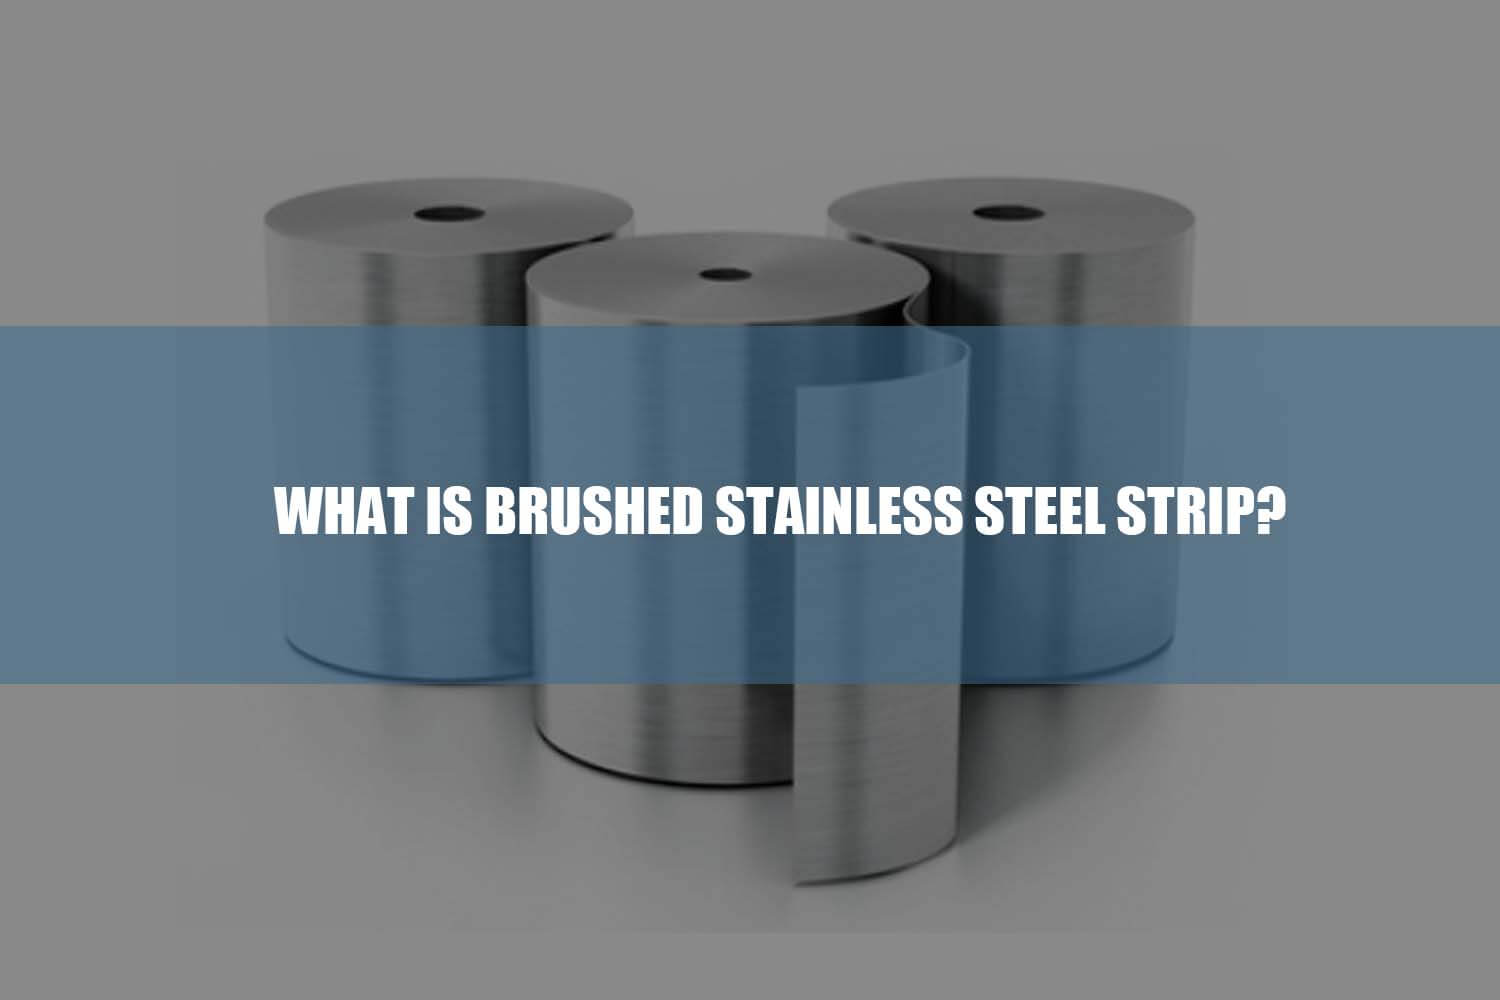 brushed stainless steel strip